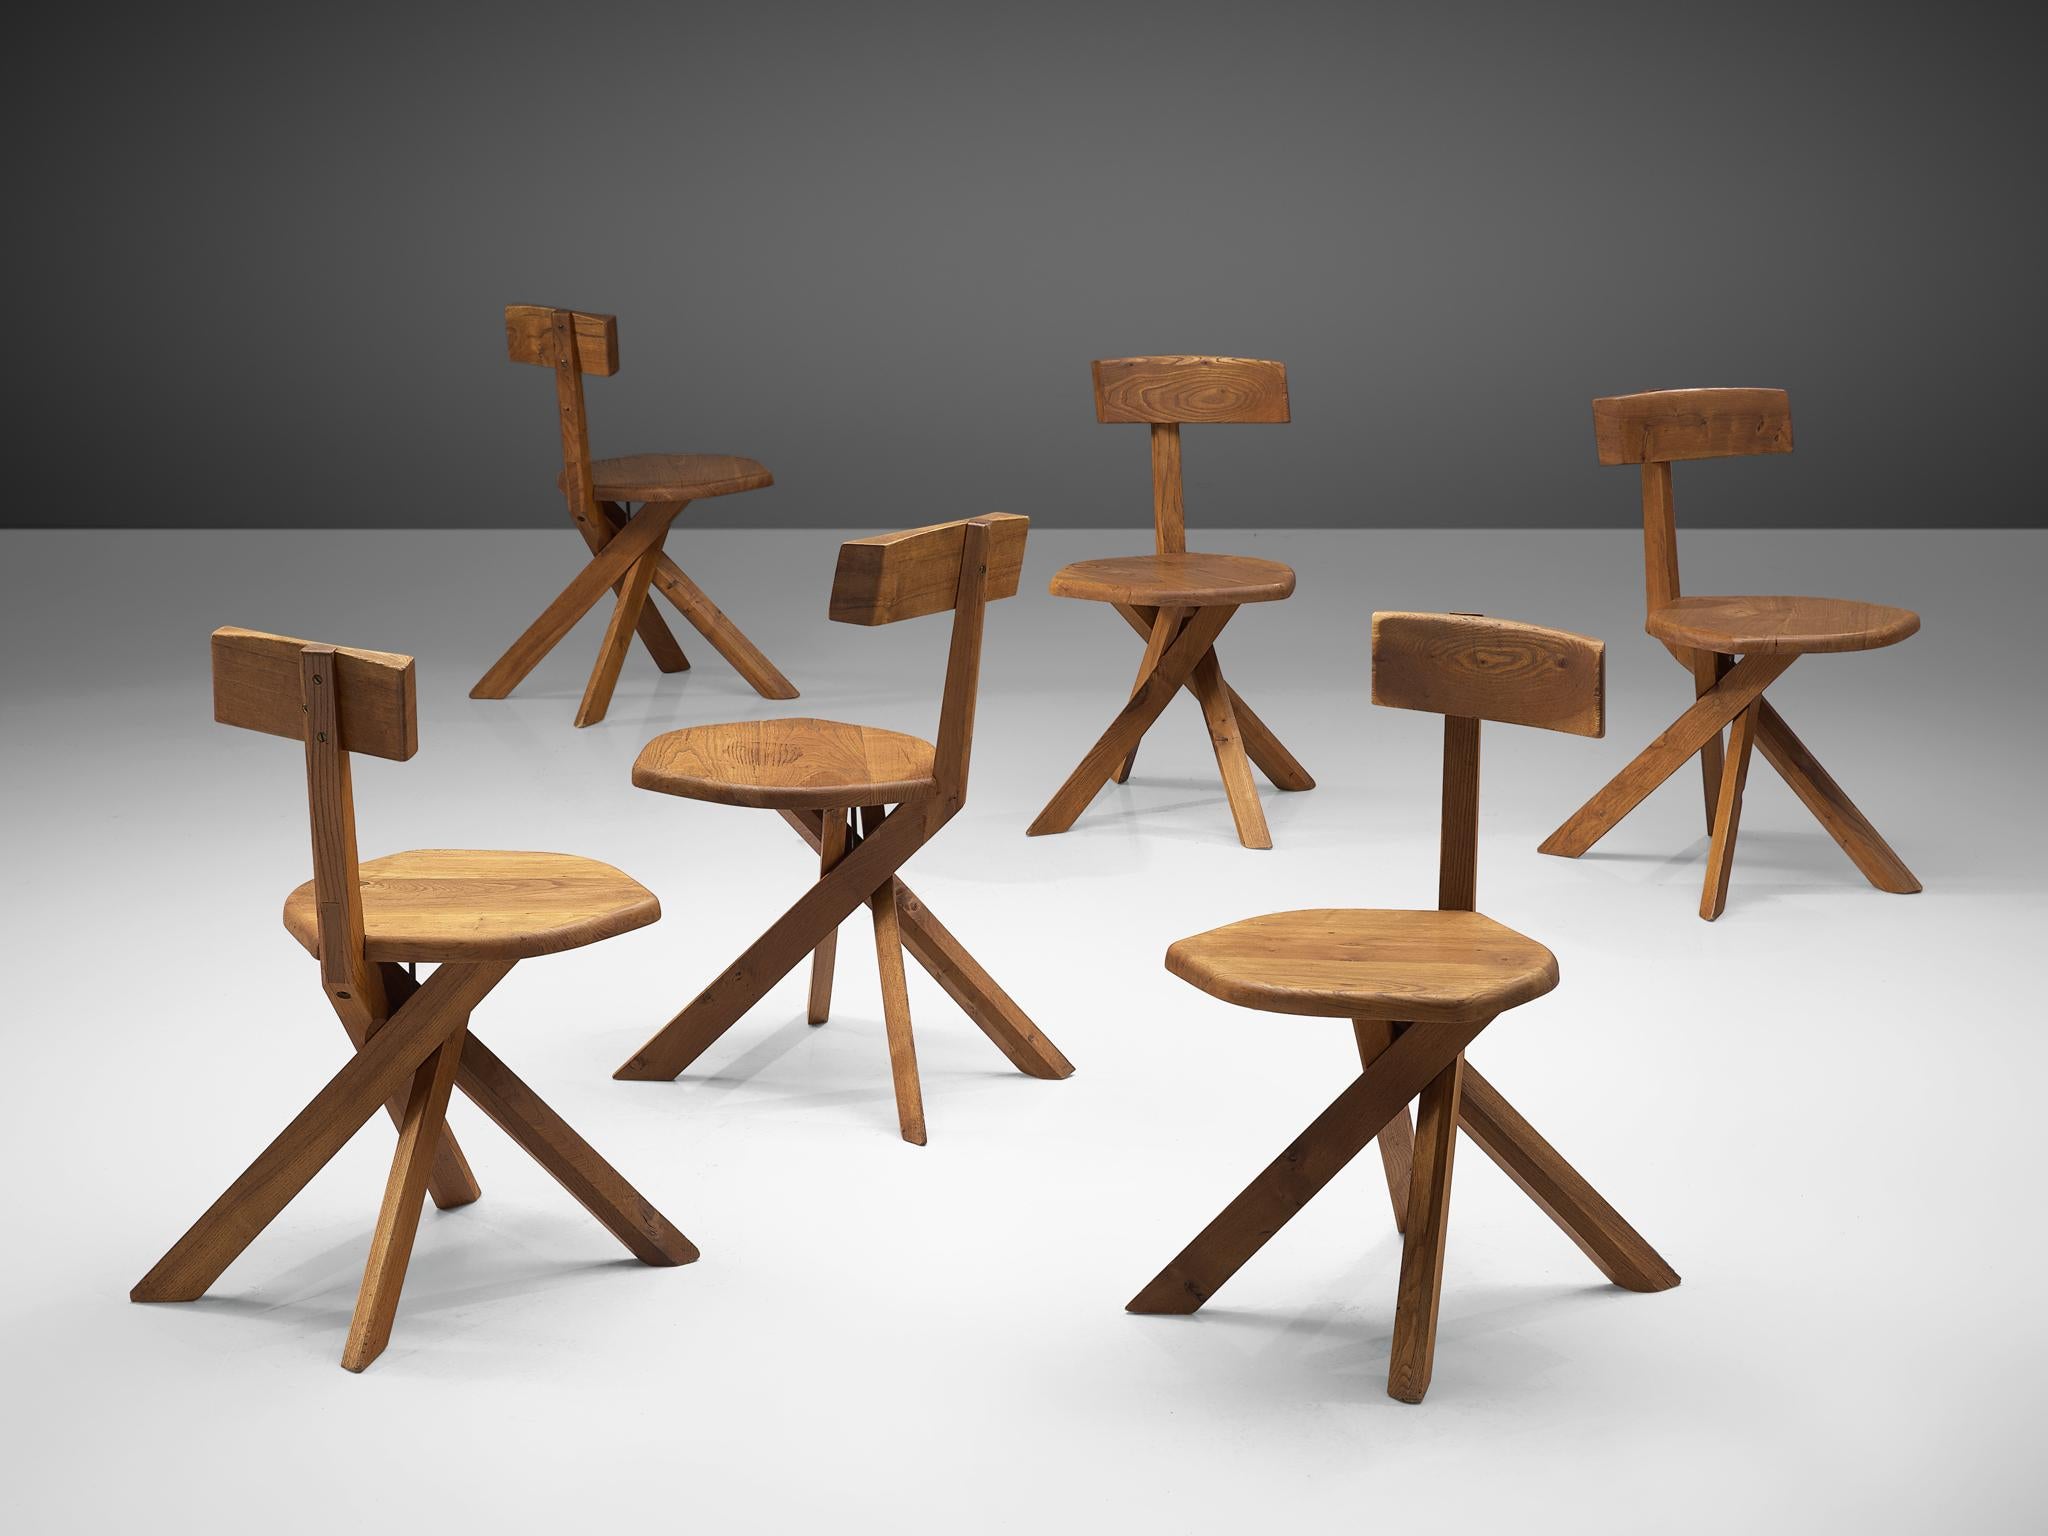 Pierre Chapo, set of six 'S34' dining chairs, elmwood, France, 1960s

These asymmetrical chairs with twisted base are true icons of Pierre Chapo's playful and solemn designs. The backrest is placed just slightly out of the middle, this imperfection